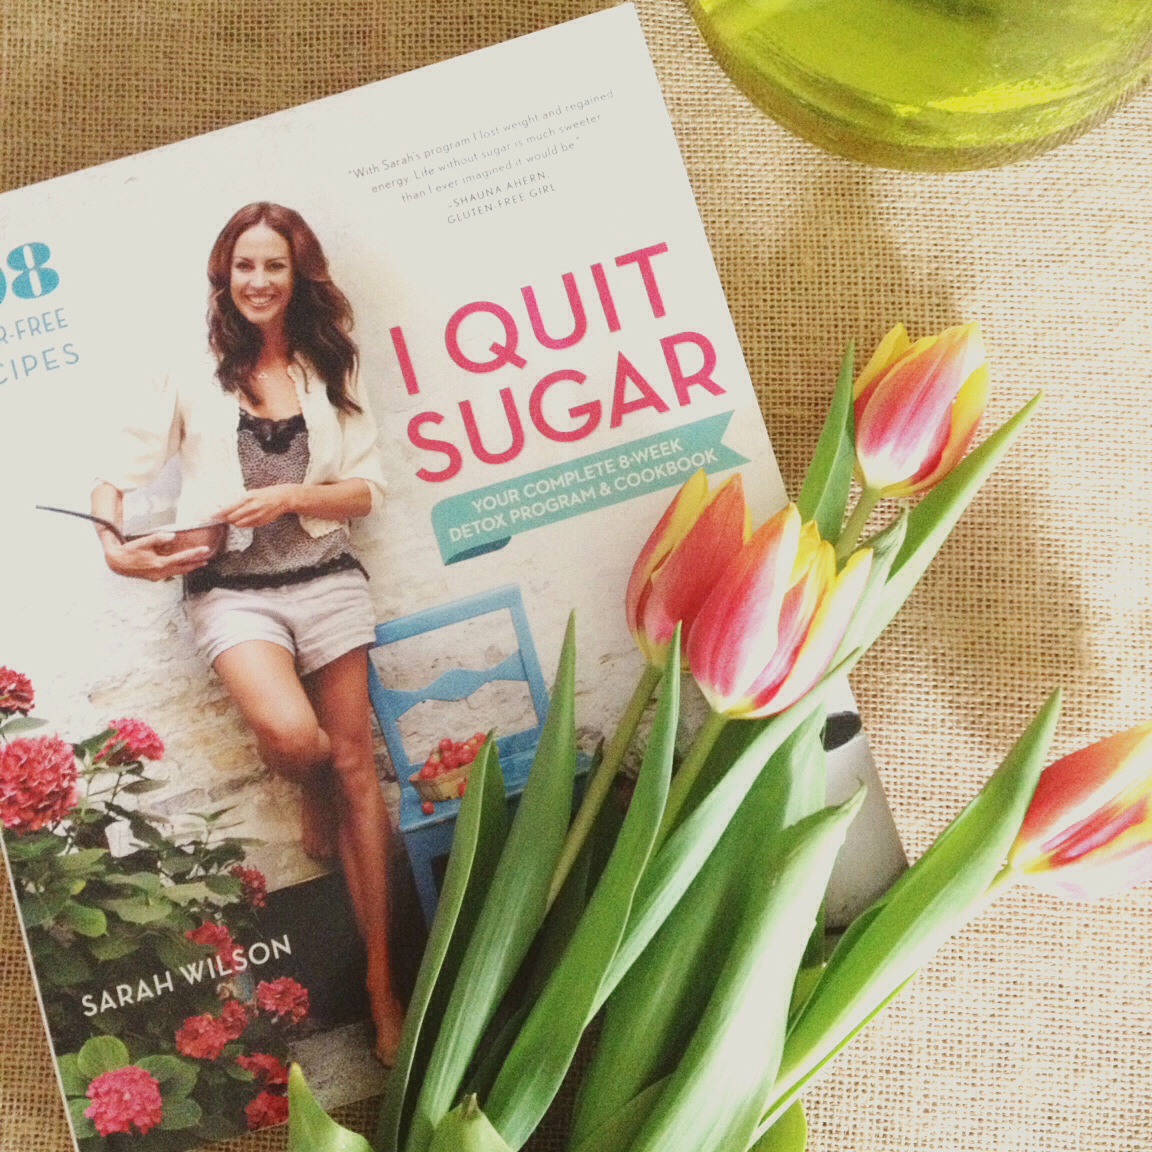 The Truth about Sugar and a Giveaway